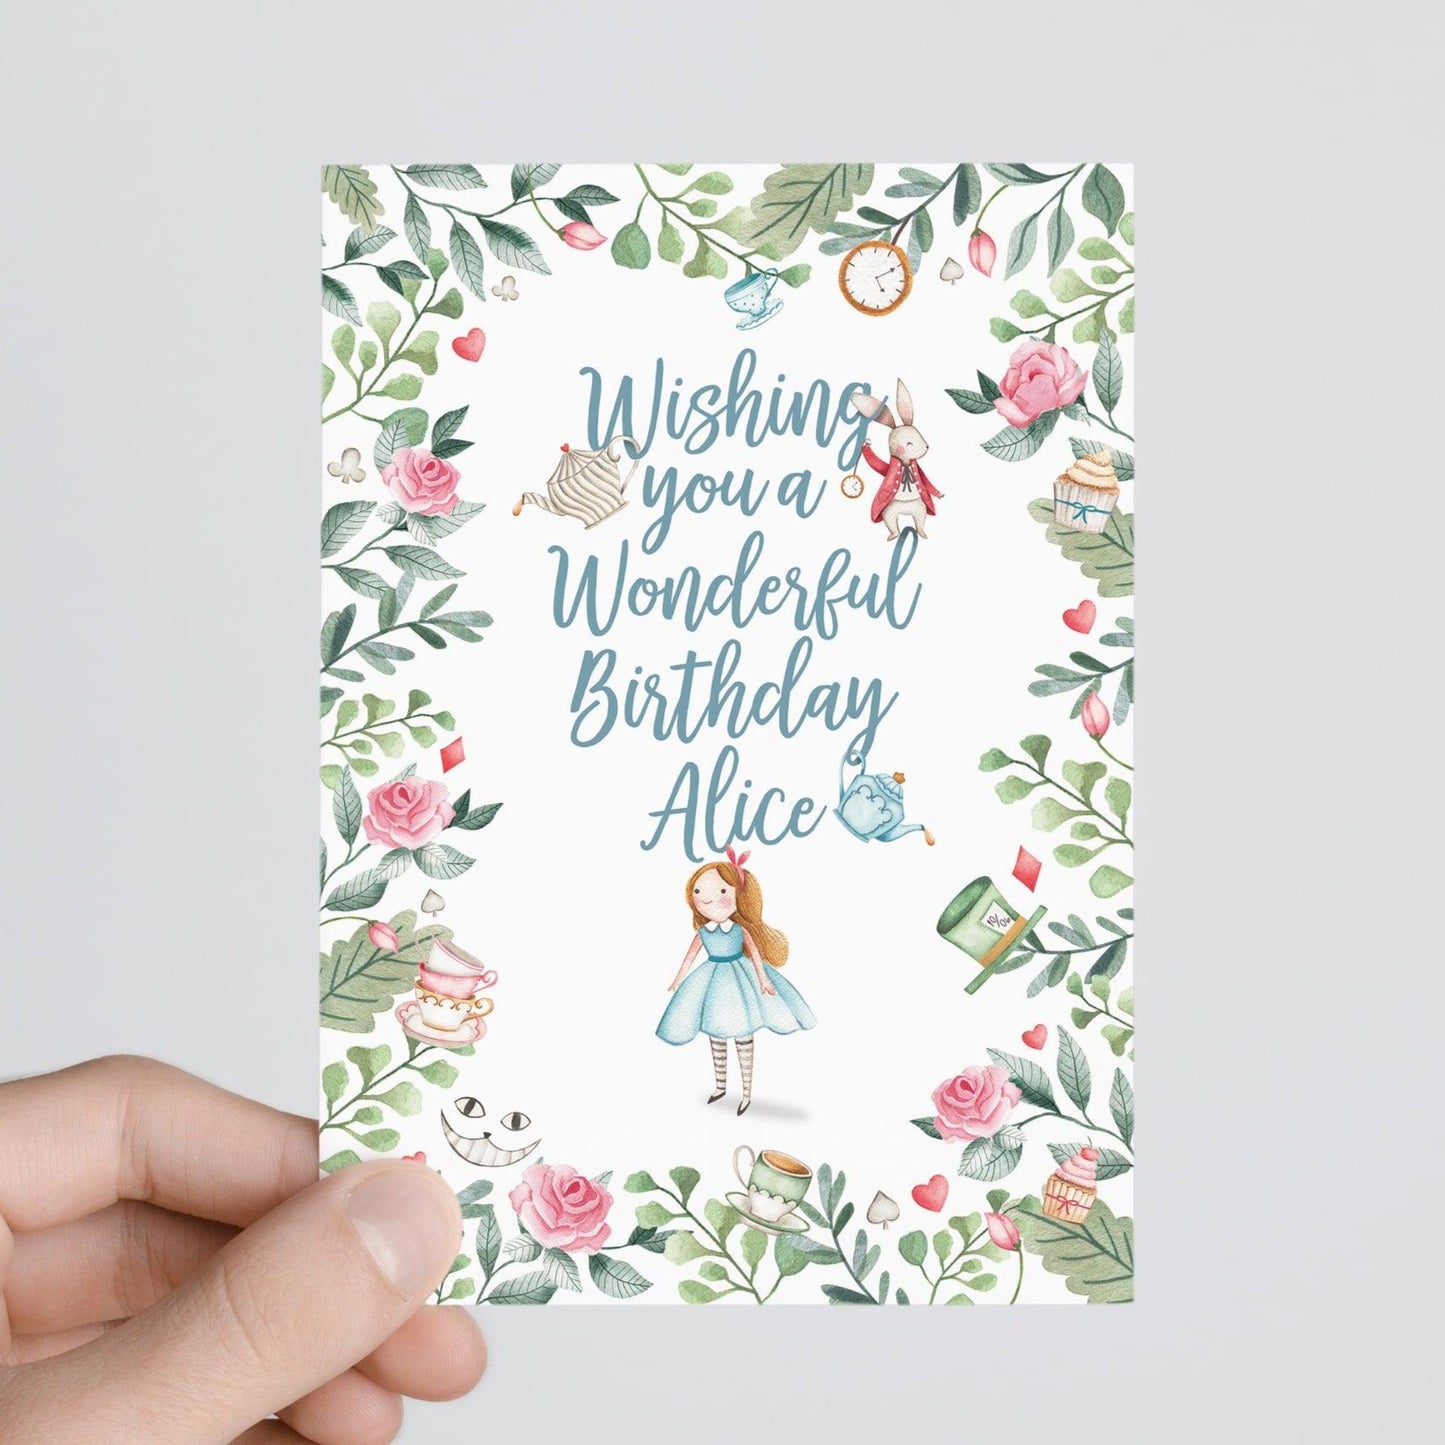 person holding Alice in wonderland personalised birthday card